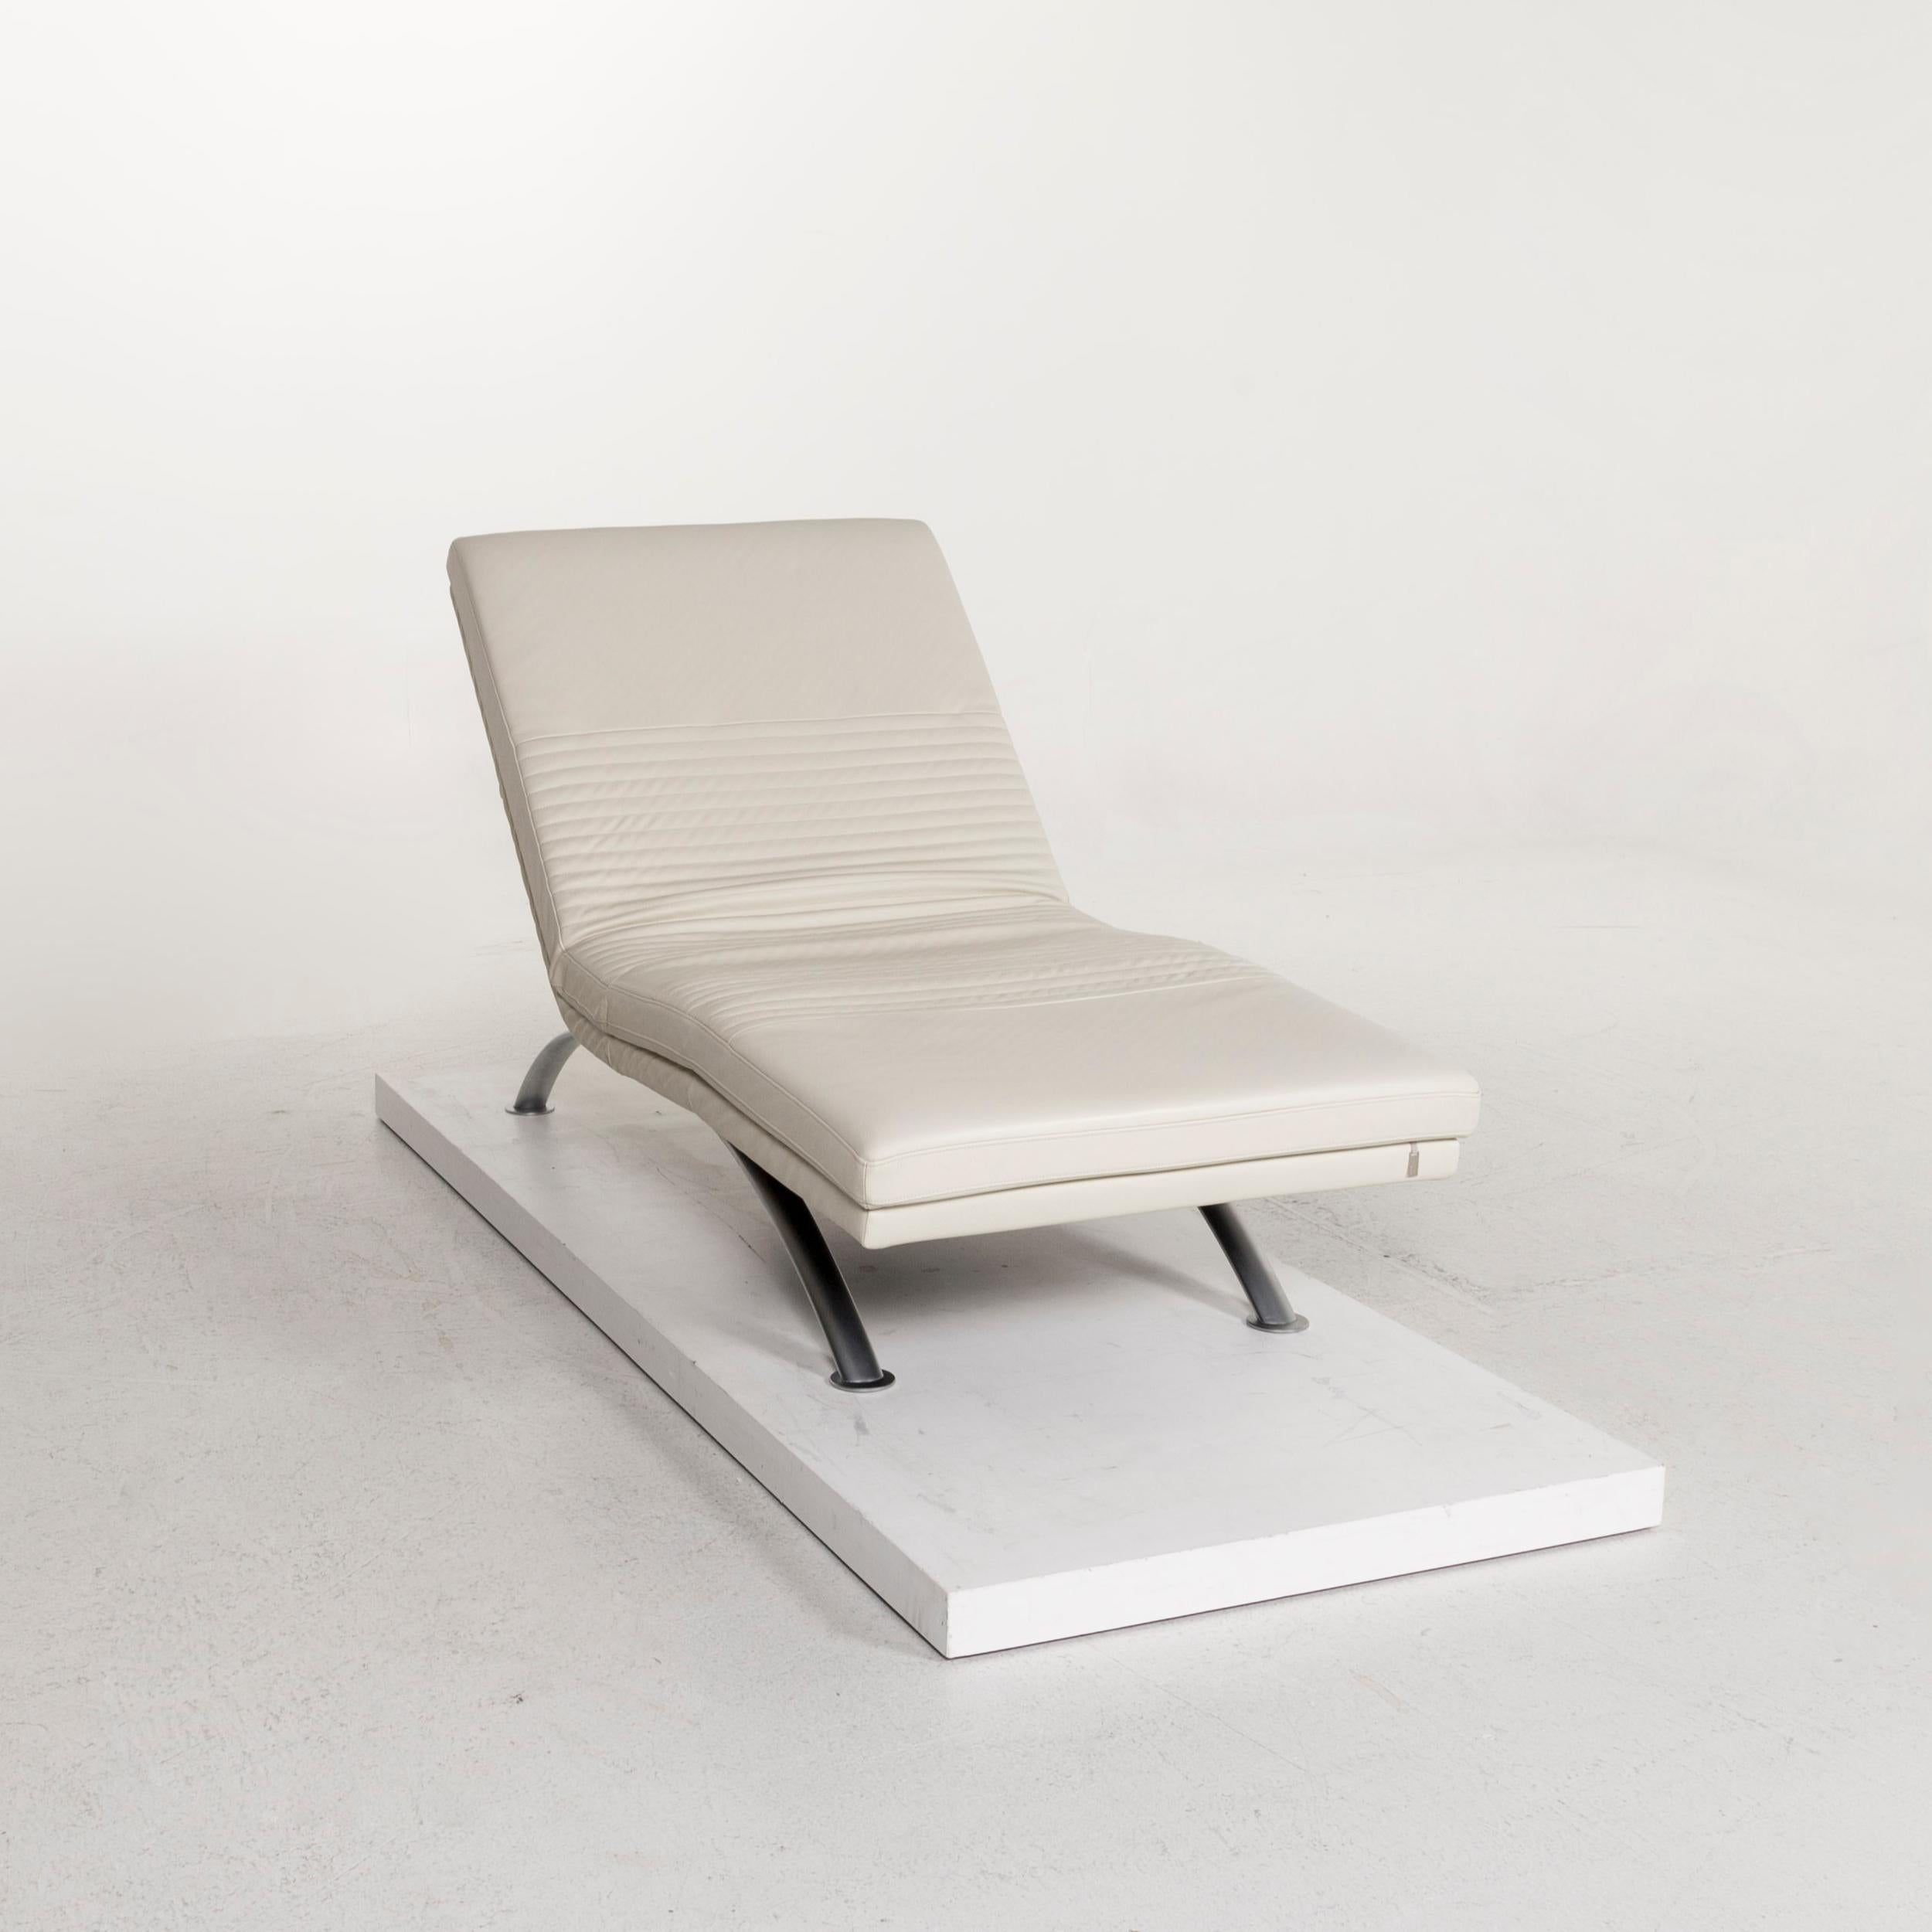 Contemporary Three-Point Leather Lounger Cream Function Relax Function